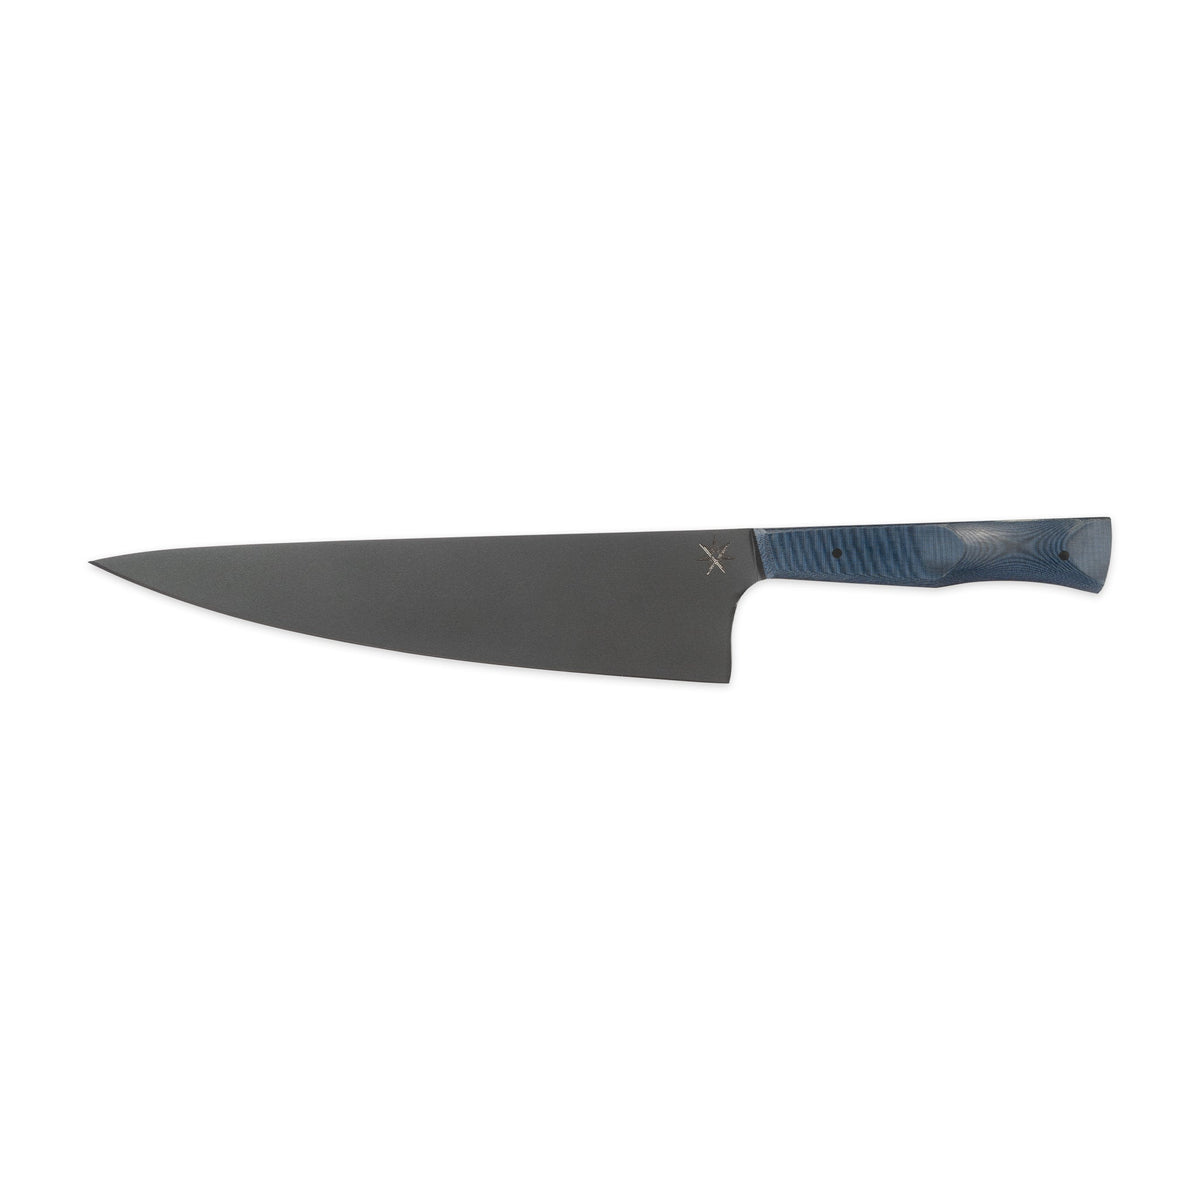 8 Inch Modern Chef Knife with Comfort Handle, Best Kitchen Gear